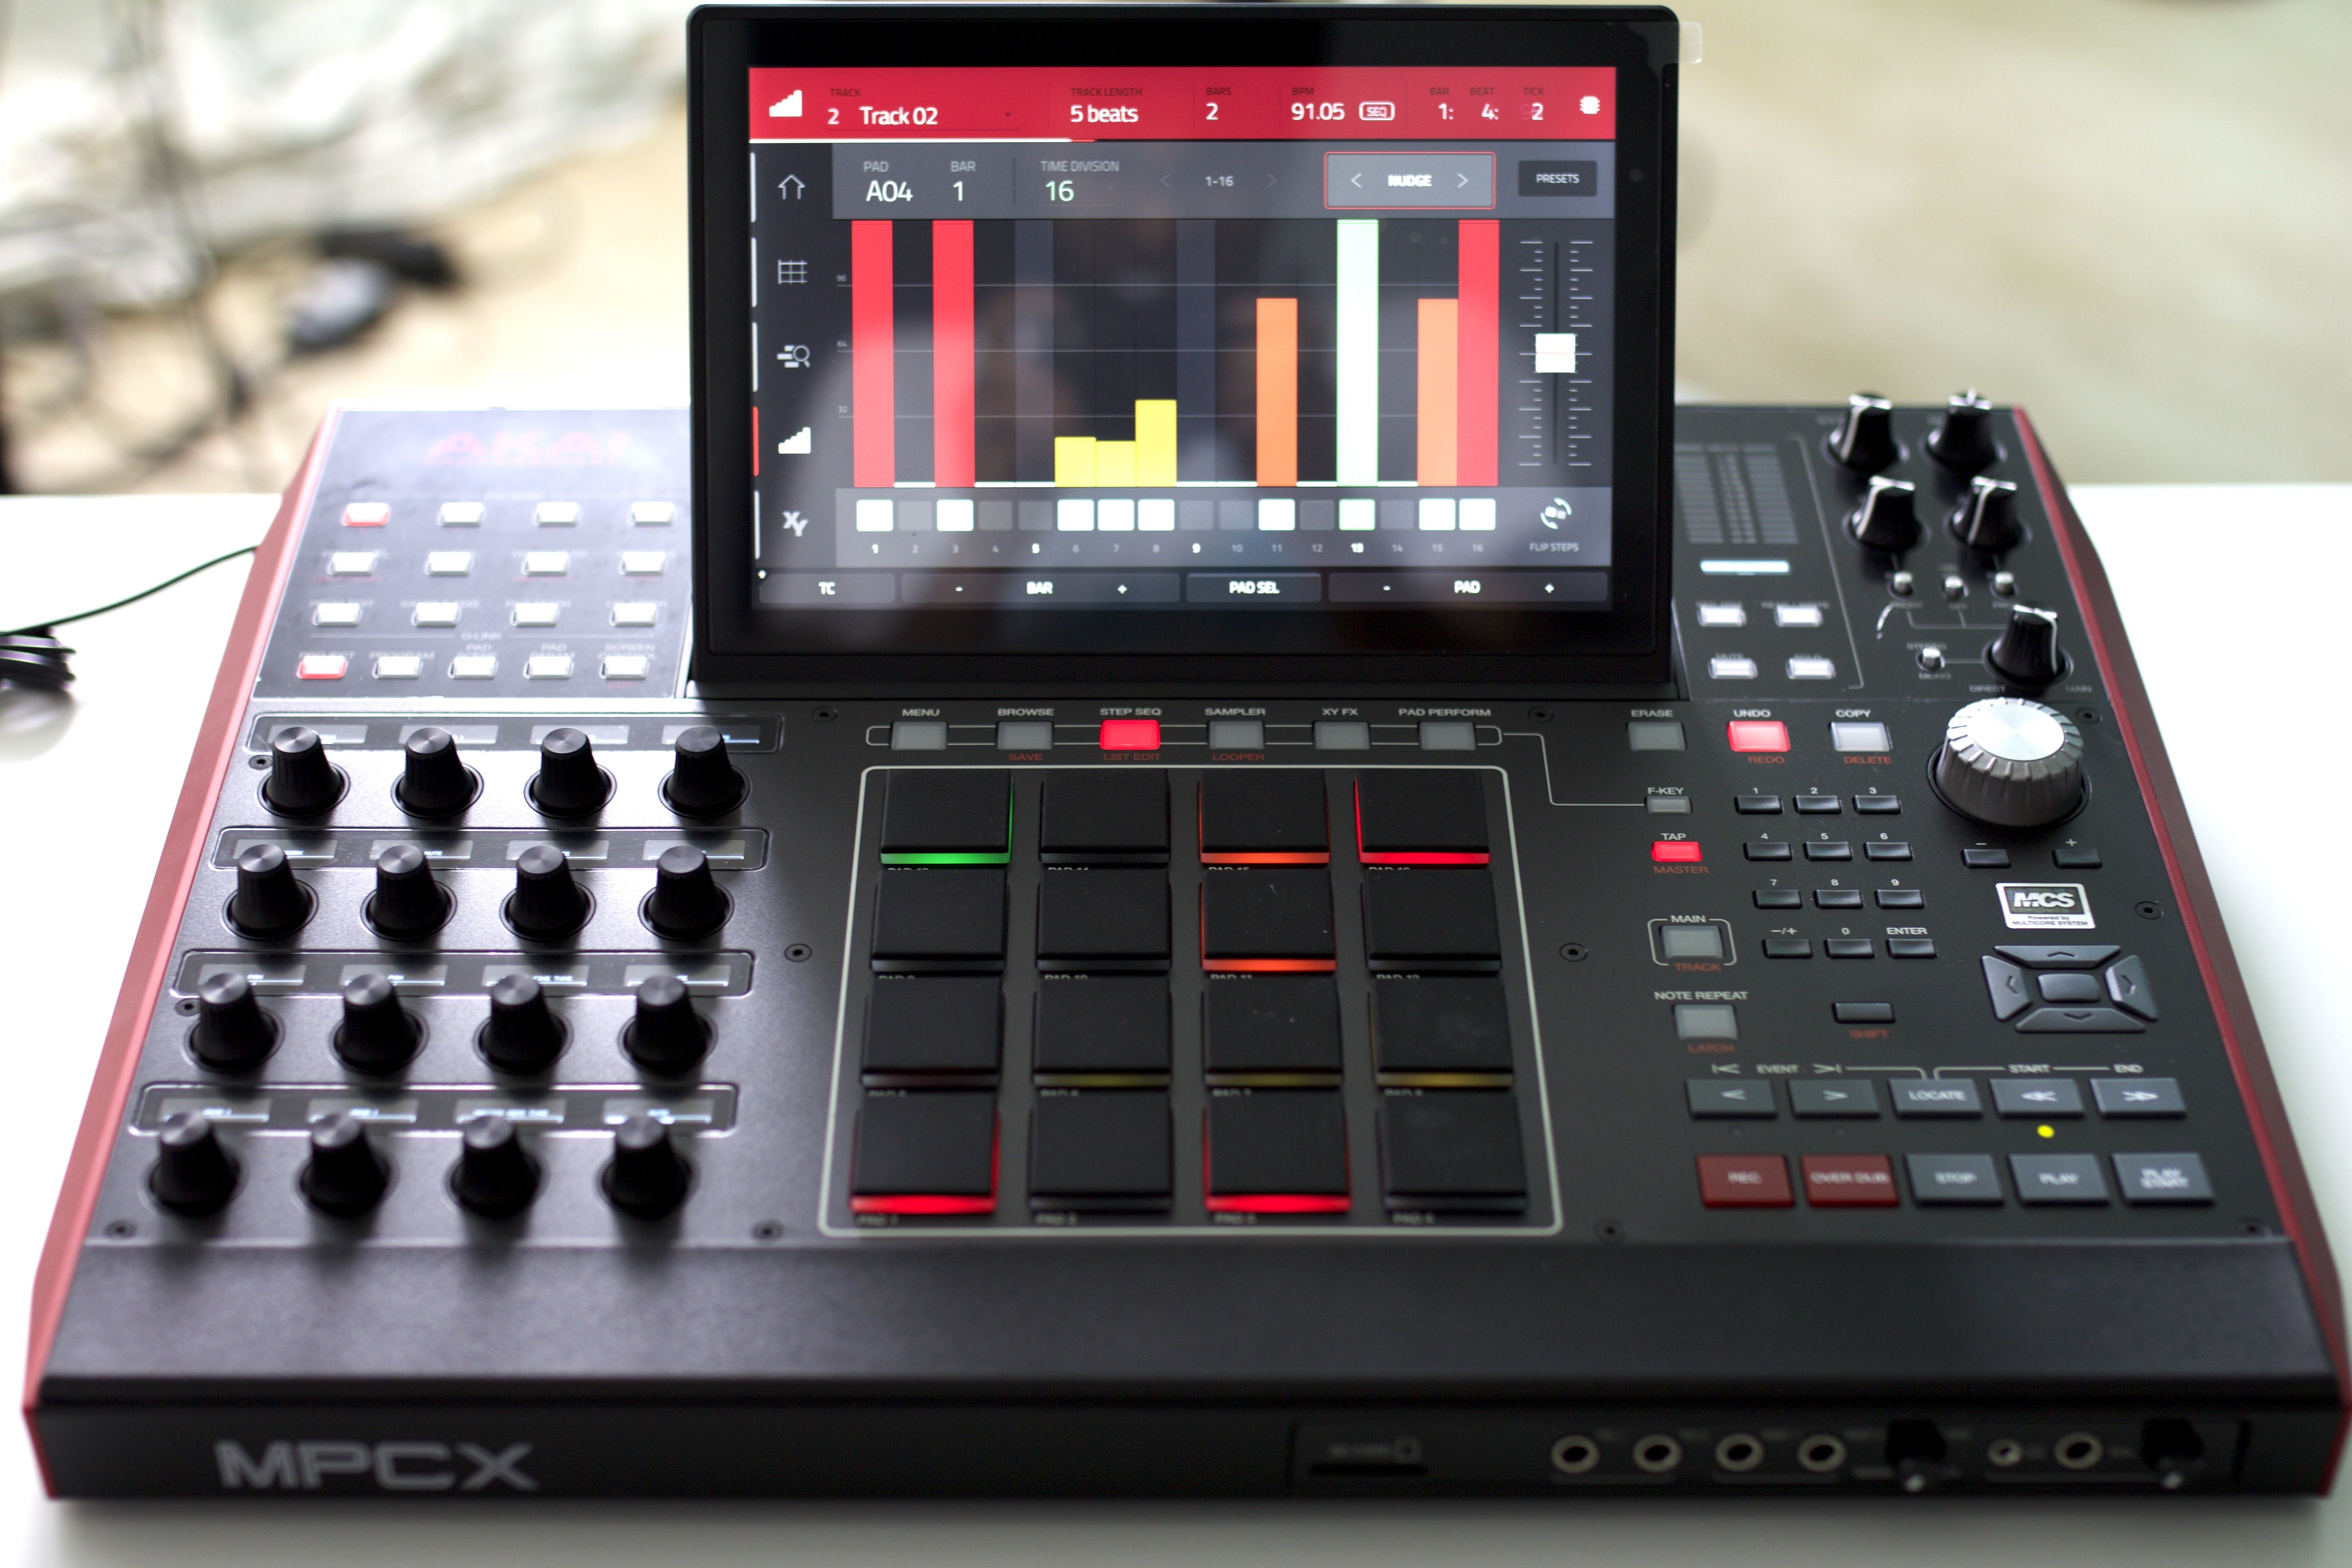 can mpc live and black use mpc 2 software